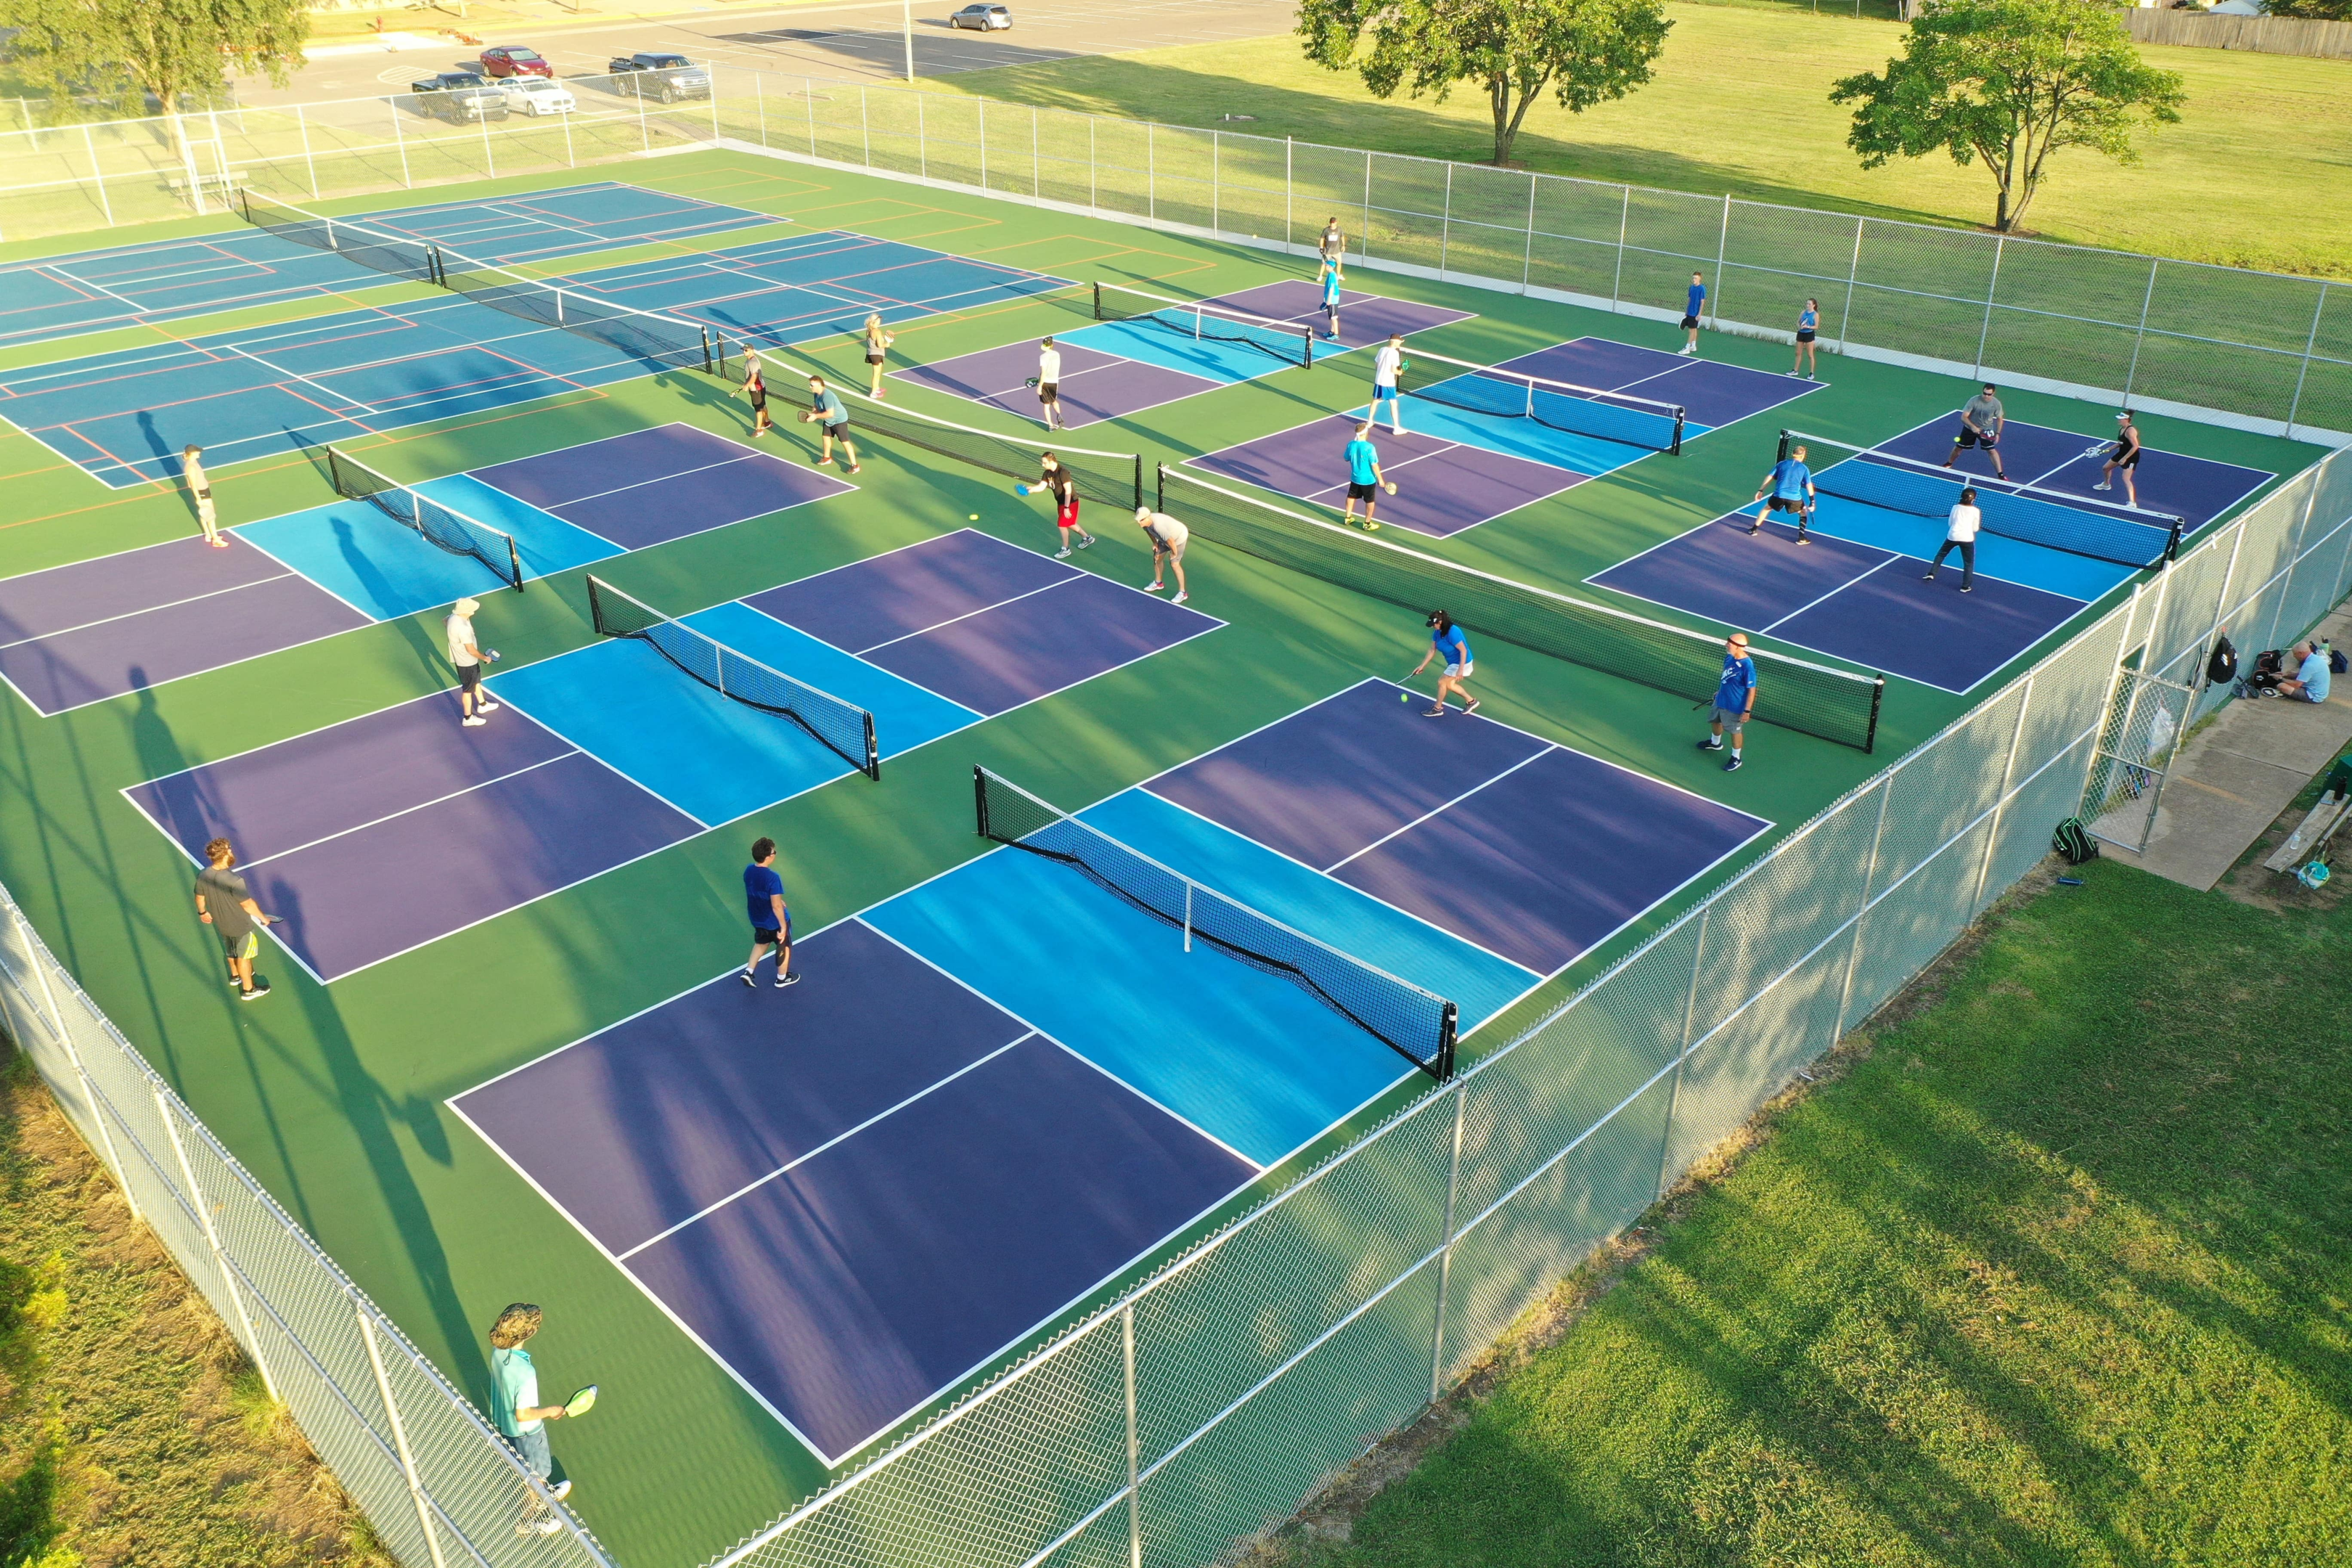 What is a 3.0 pickleball player? Competition of pickleball players 